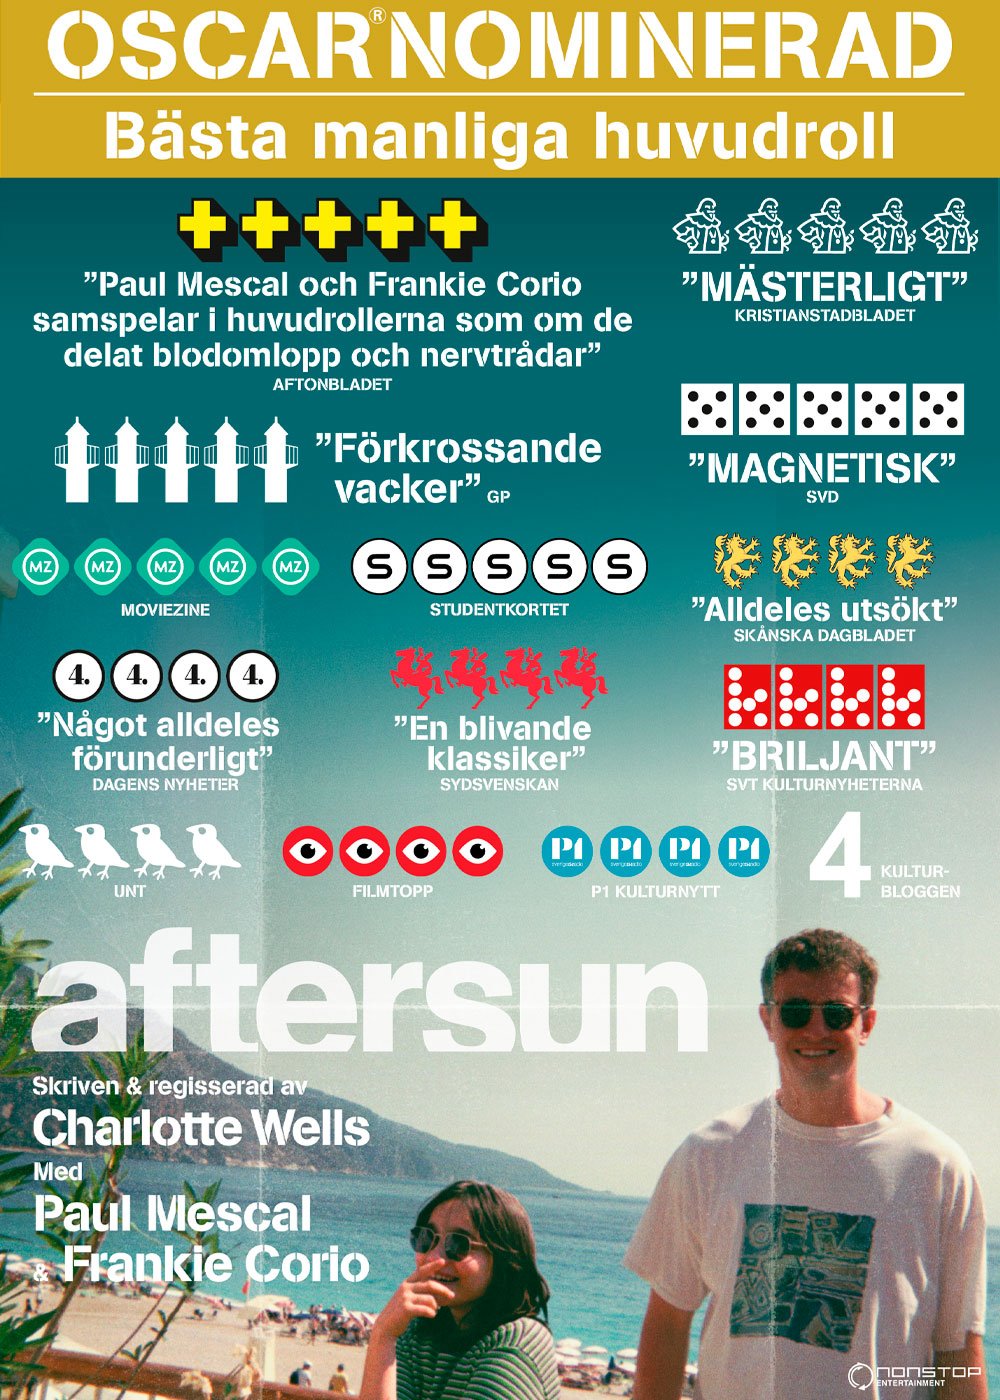 You are currently viewing Aftersun